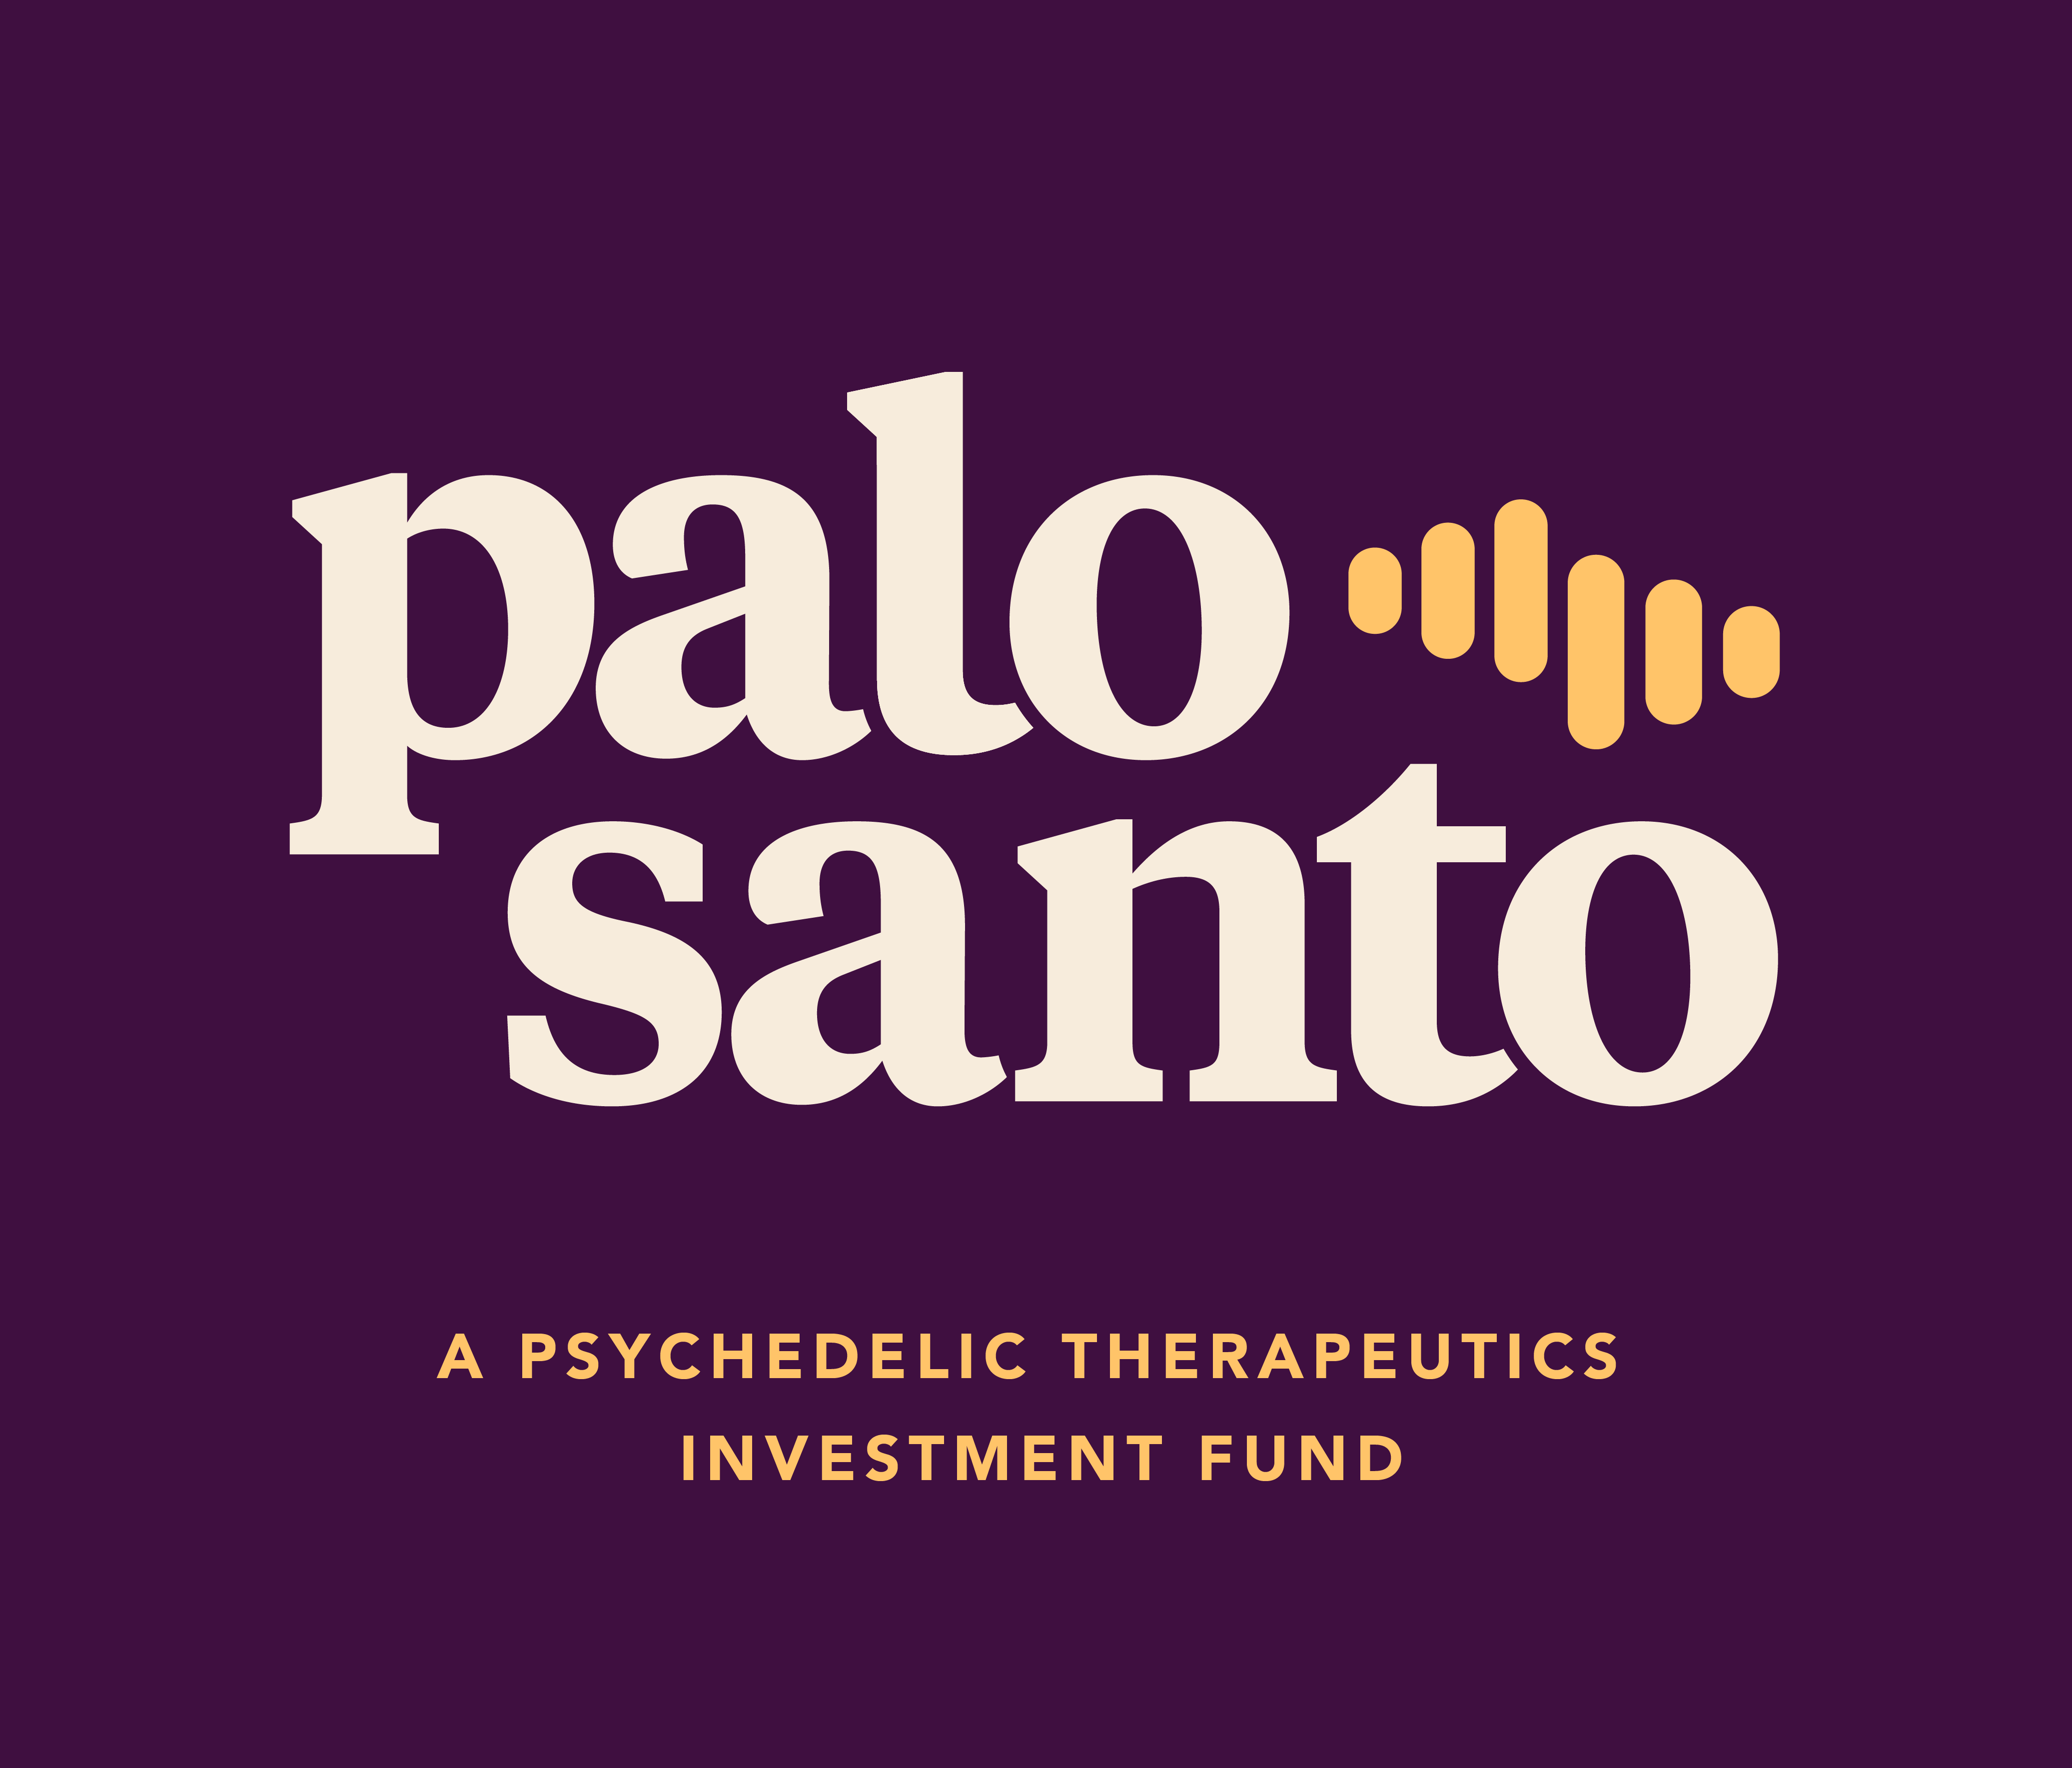 Palo Santo is a U.S.-based psychedelic investment fund focused on increasing the supply of clinically effective and accessible mental health and addiction treatment solutions needed in today’s world.